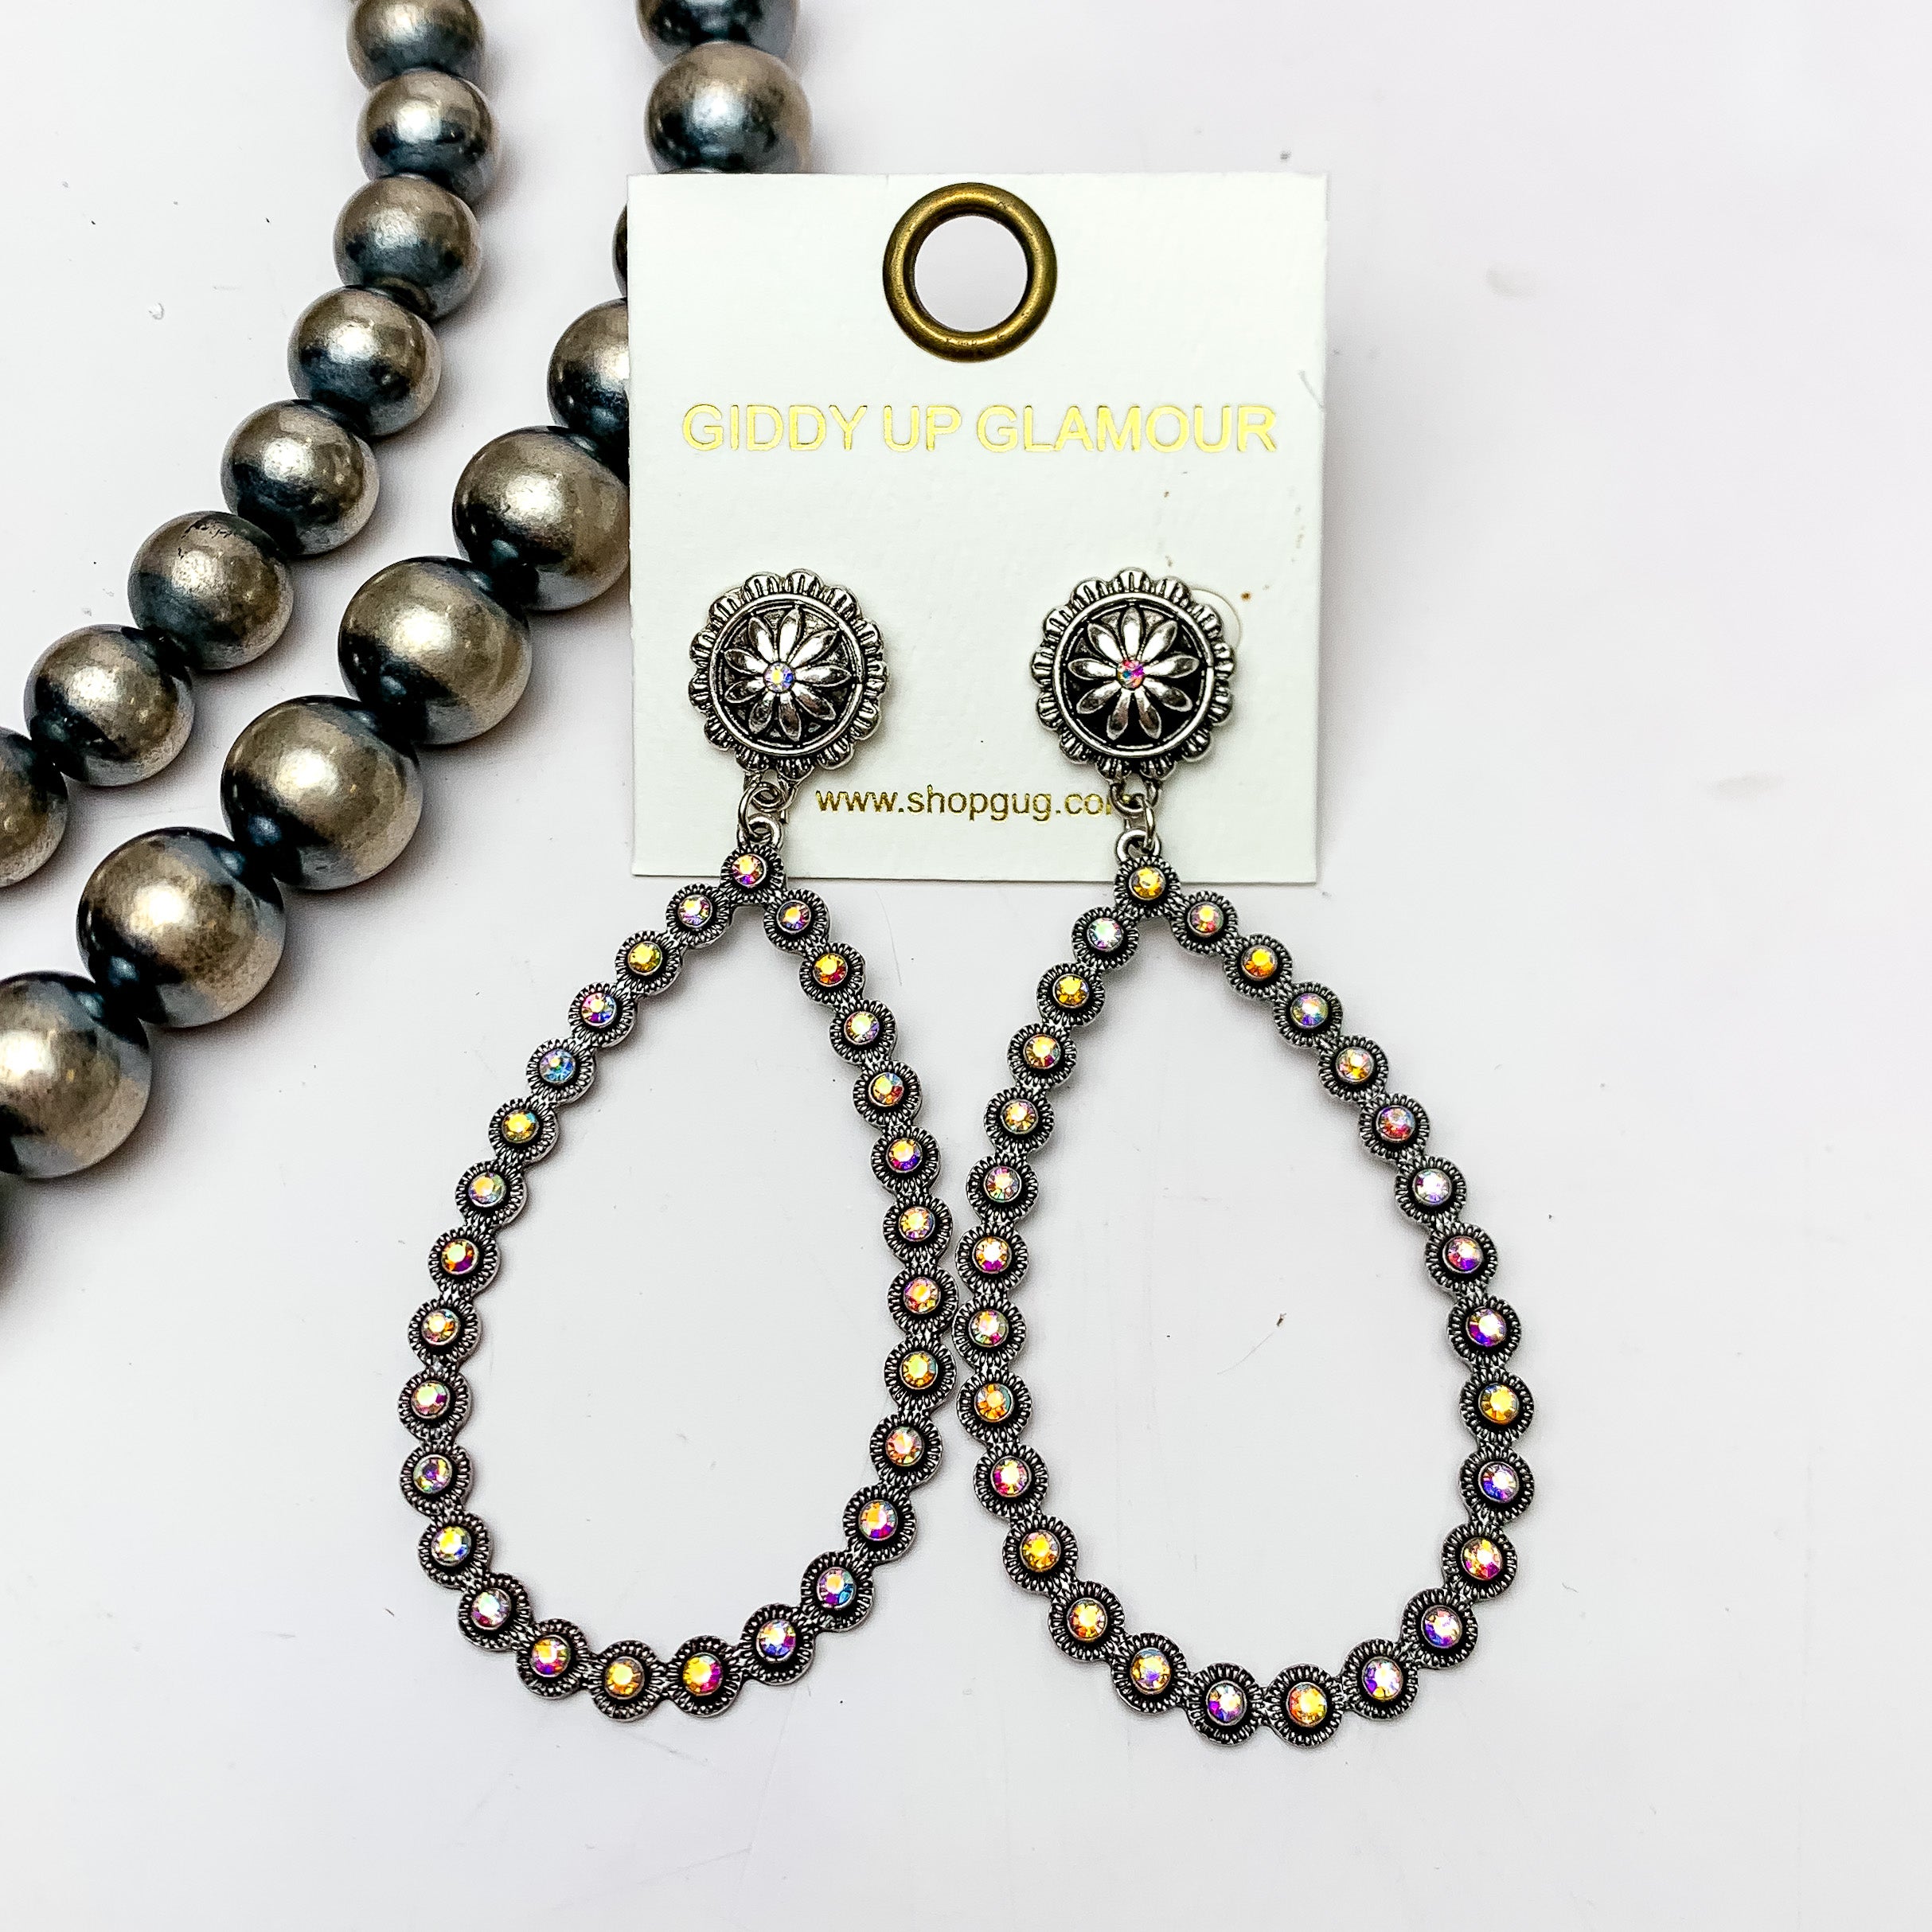 AB Crystal Open Teardrop Earrings in Silver Tone. Pictured on a white background with Navajo pearls on the left side.